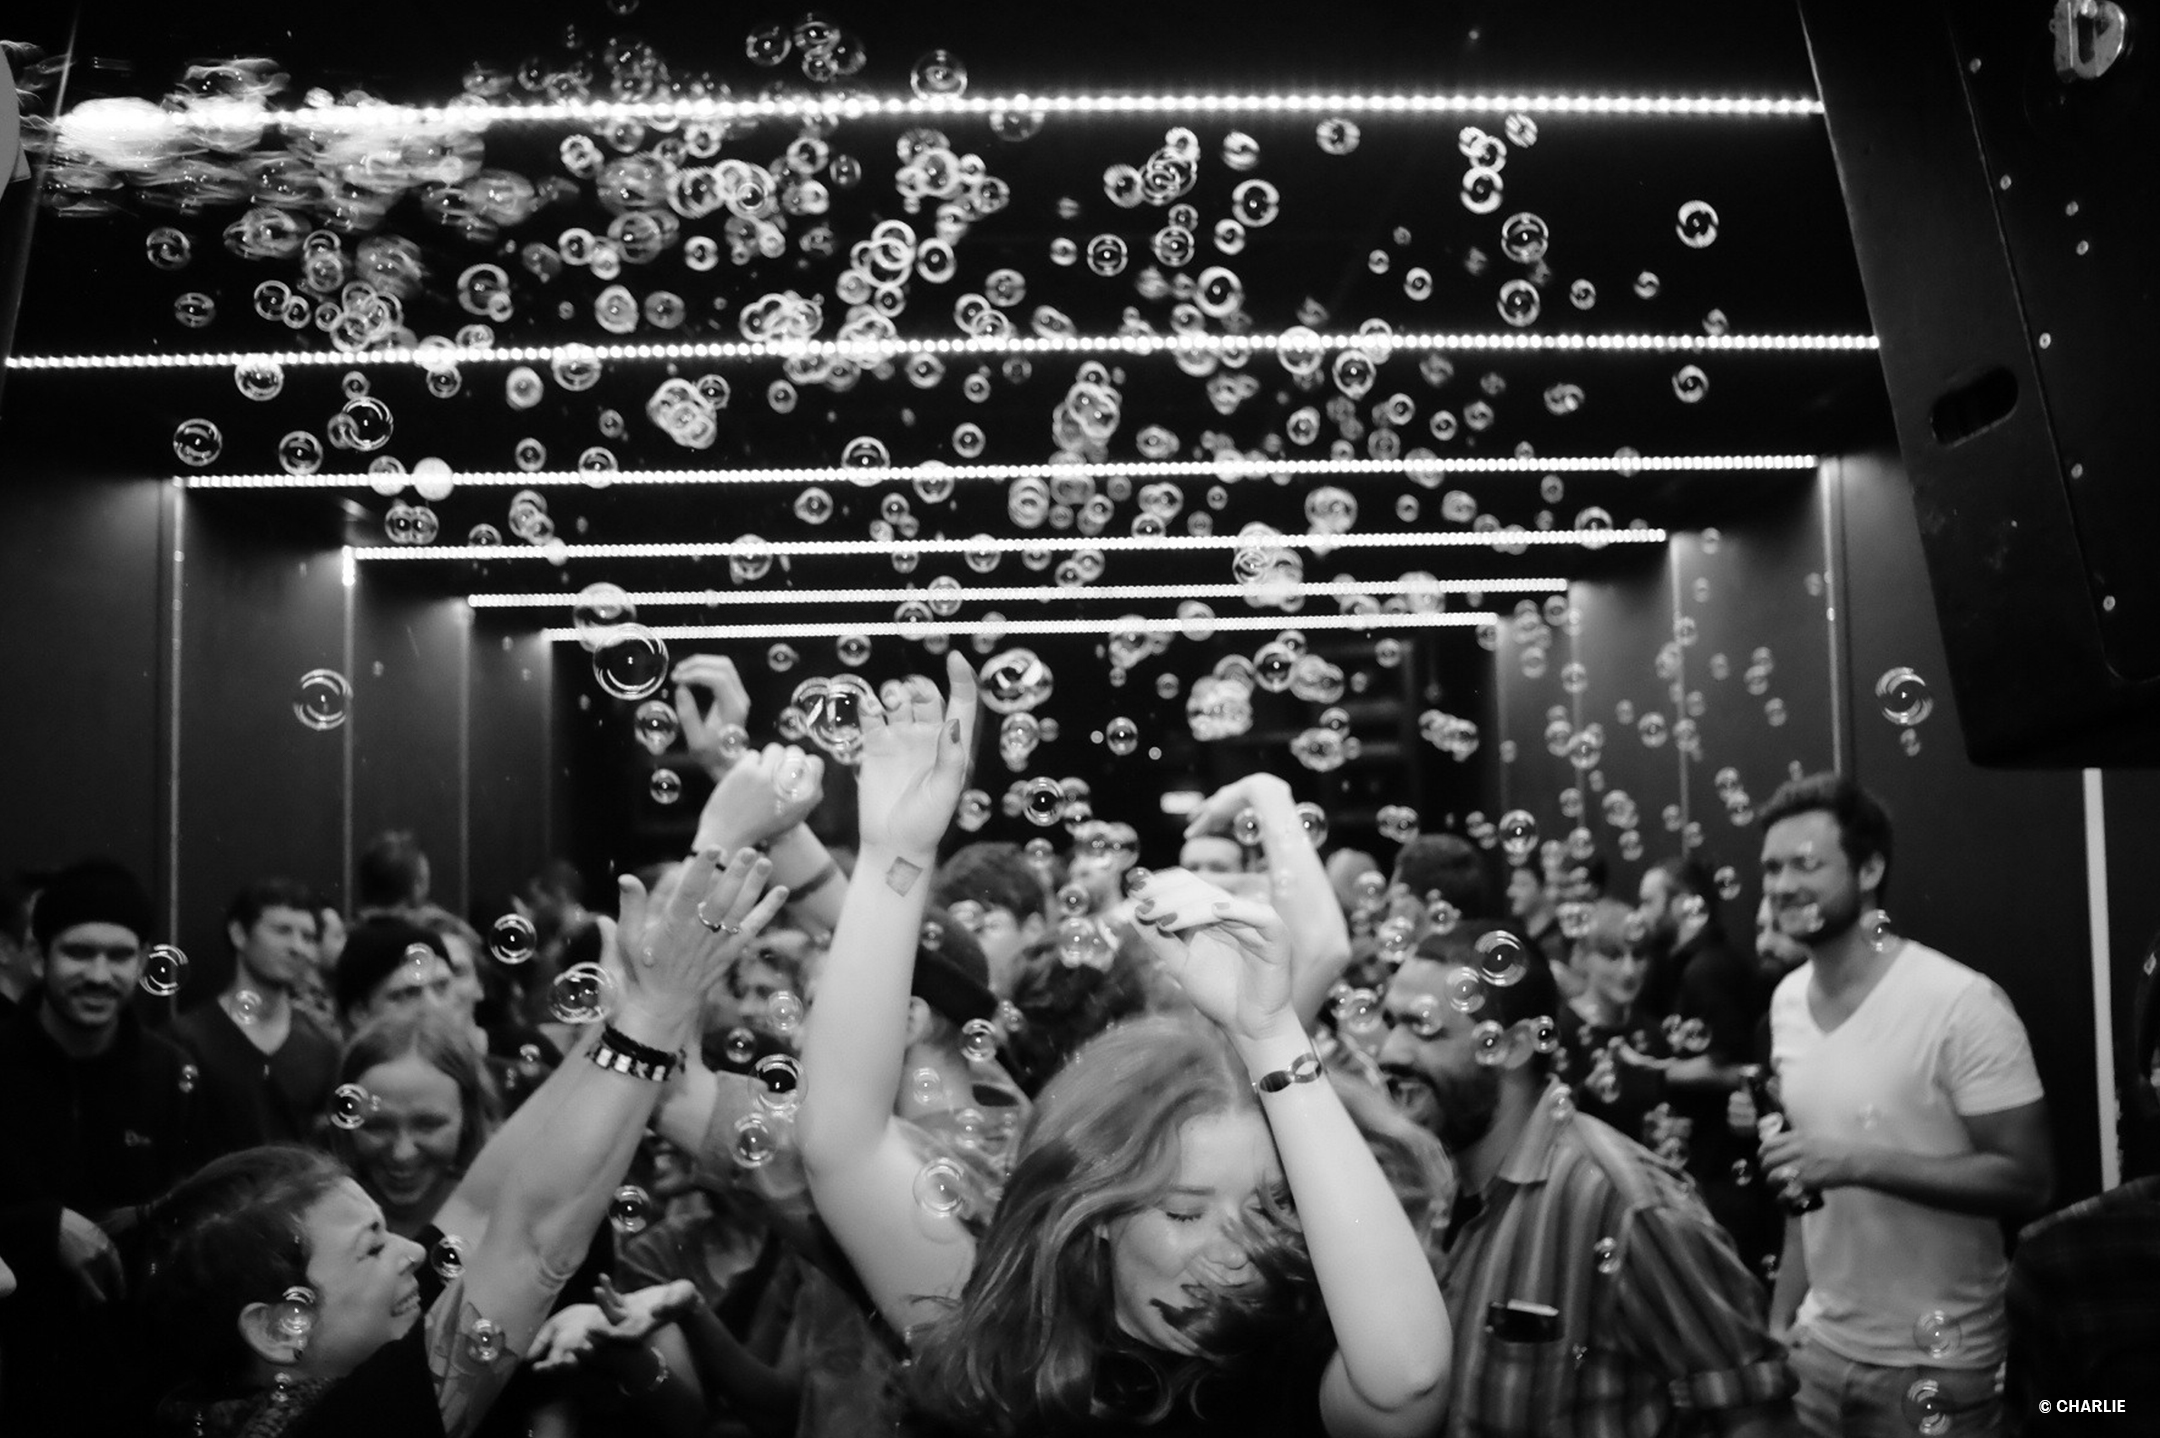 Many people celebrate and dance in a small club while soap bubbles rain down on them